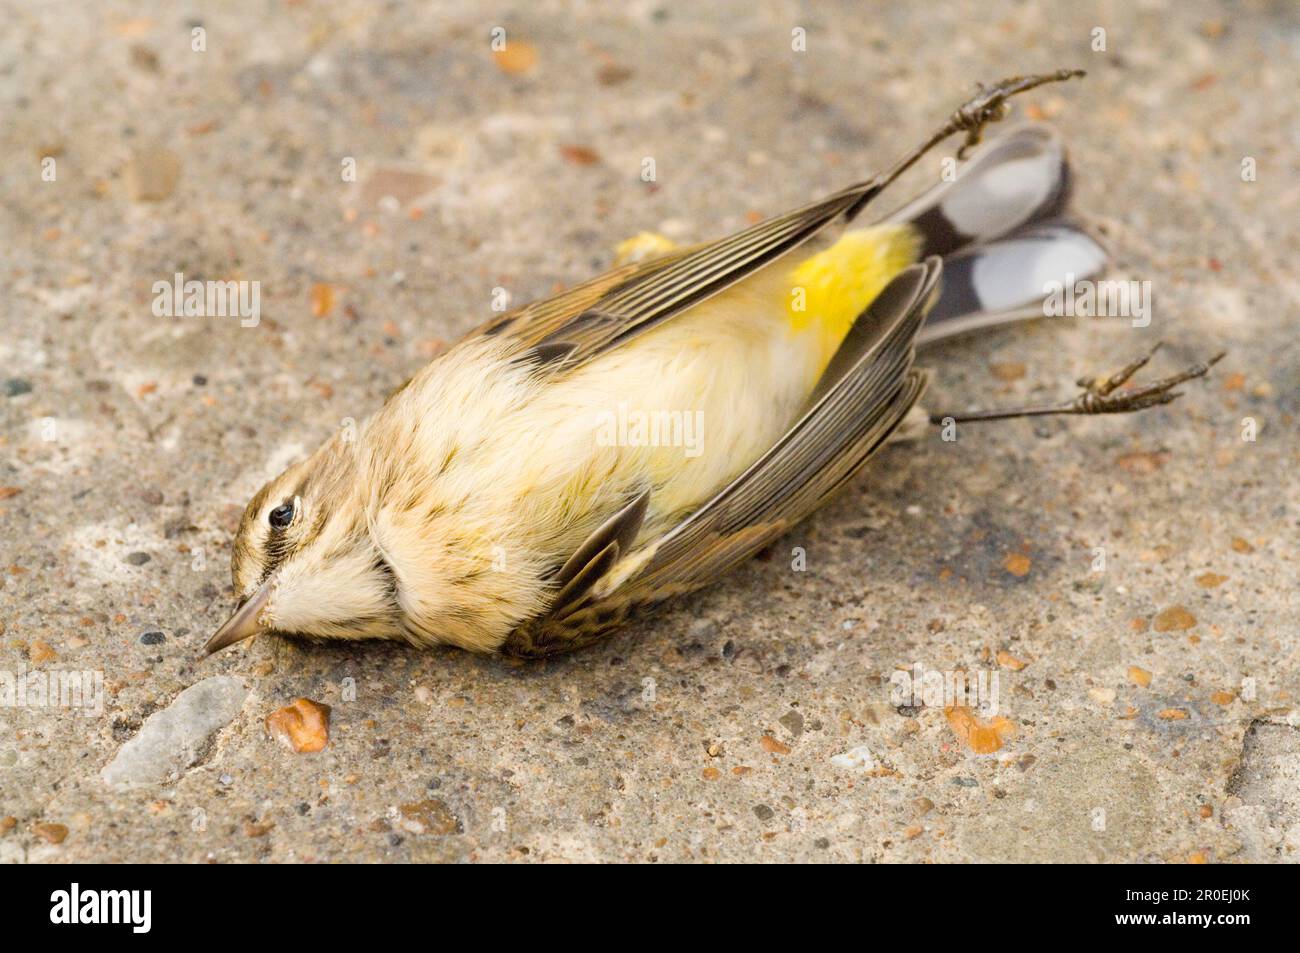 Palm Warbler, songbirds, animals, birds, Palm Warbler (Dendroica palmarum) autumn plumage, passage migrant casualty, dead on pavement, Chicago Stock Photo